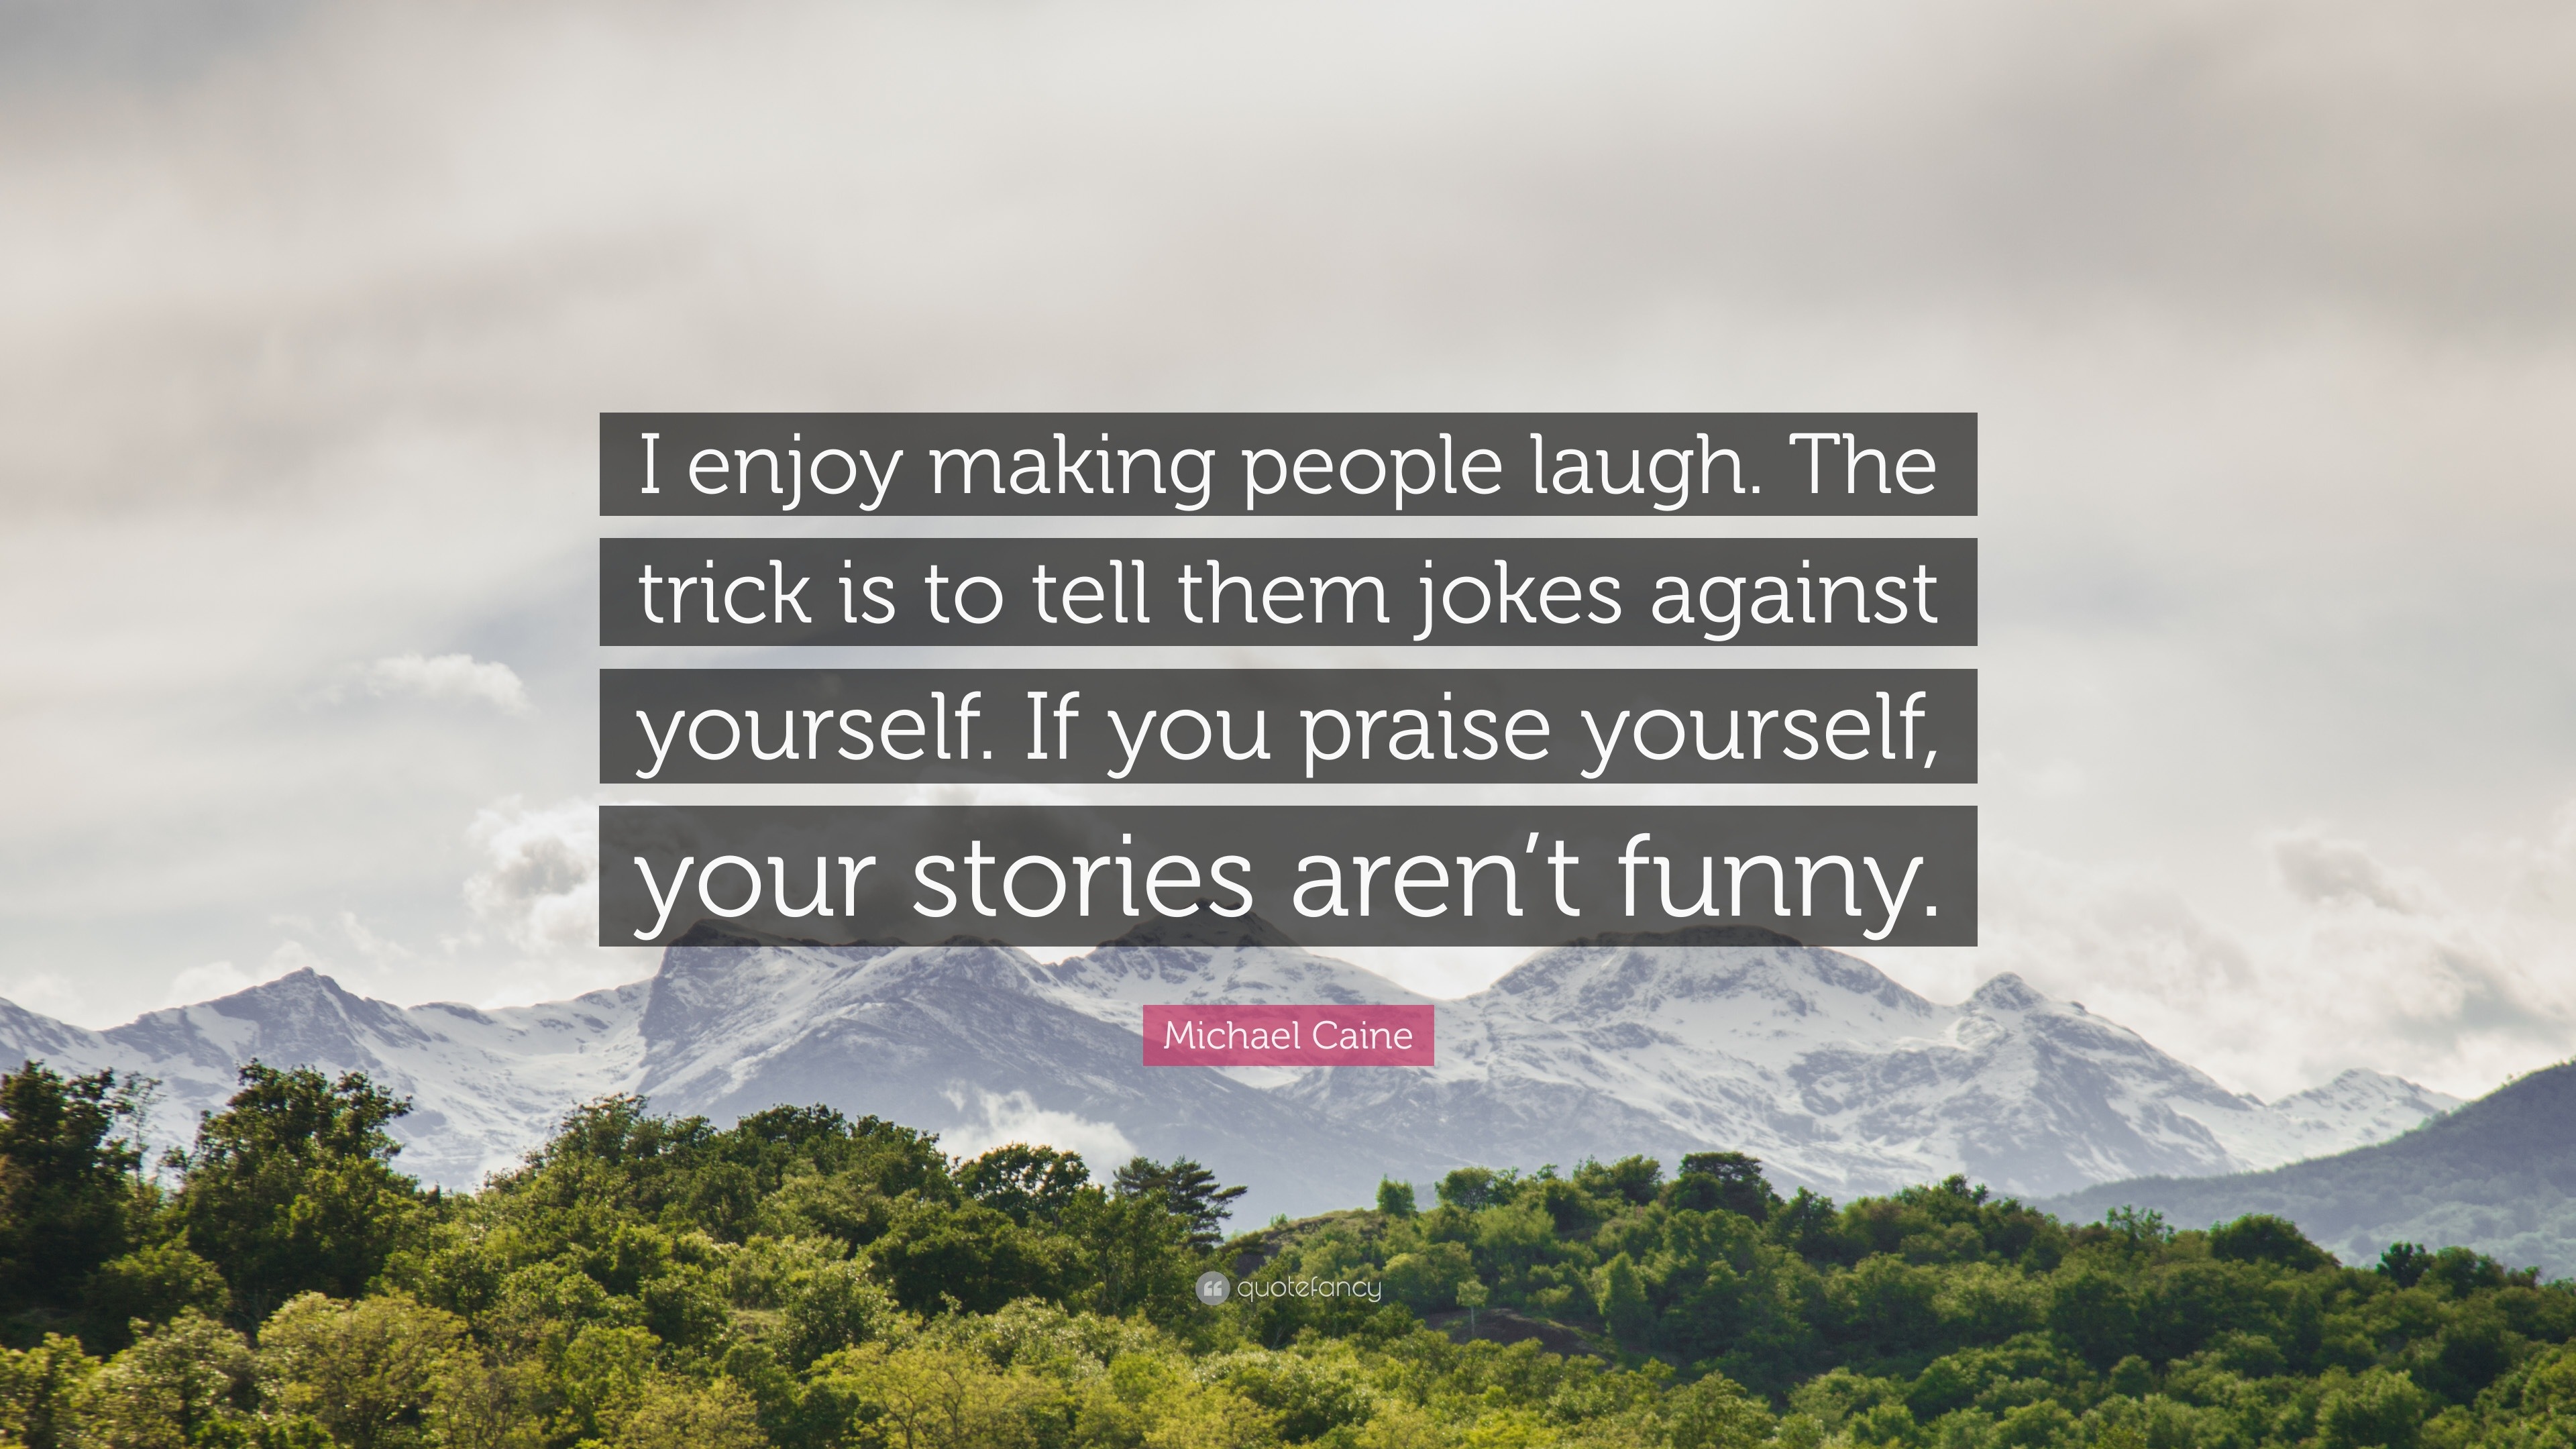 Michael Caine Quote: “I enjoy making people laugh. The trick is to tell  them jokes against yourself. If you praise yourself, your stories aren...”